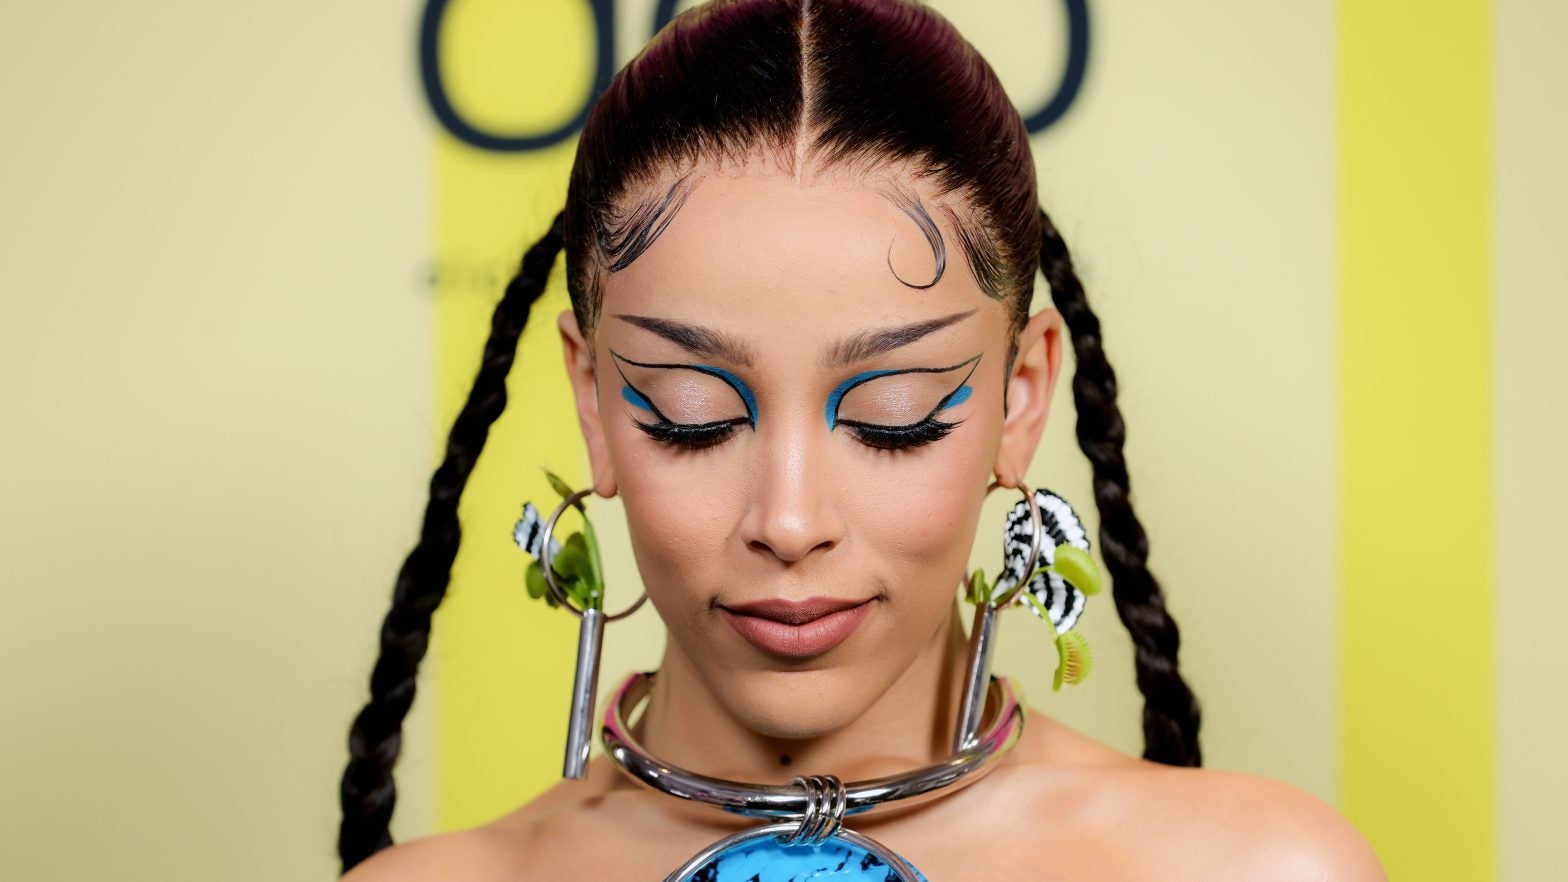 EXCLUSIVE: How Doja Cat's Hairstylist Created Not One, But Two Ornate Braid Looks For The 2021 Billboard Music Awards